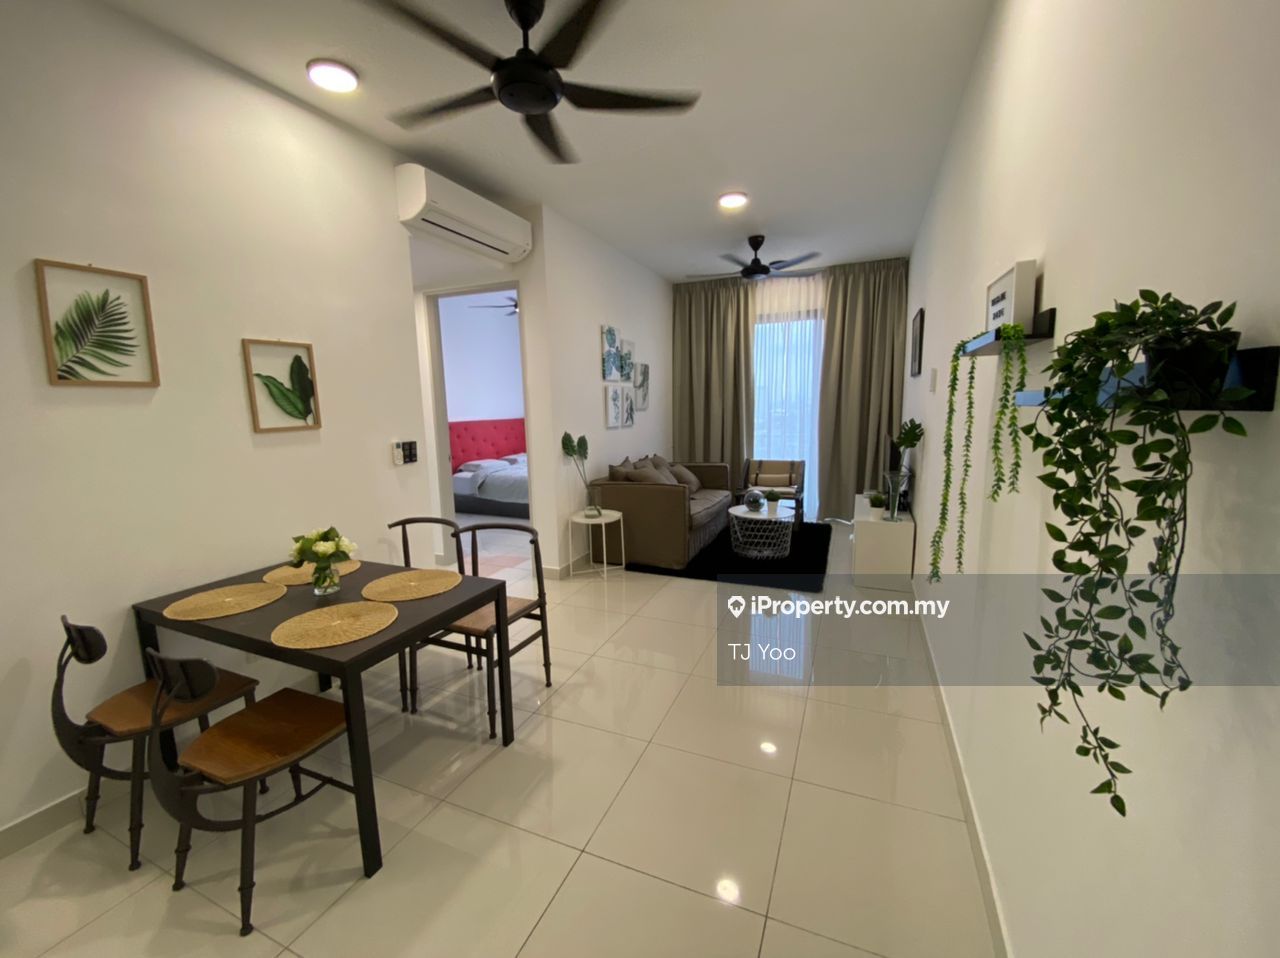 Far East Serviced Residence 2 bedrooms for rent in Kuchai Lama, Kuala